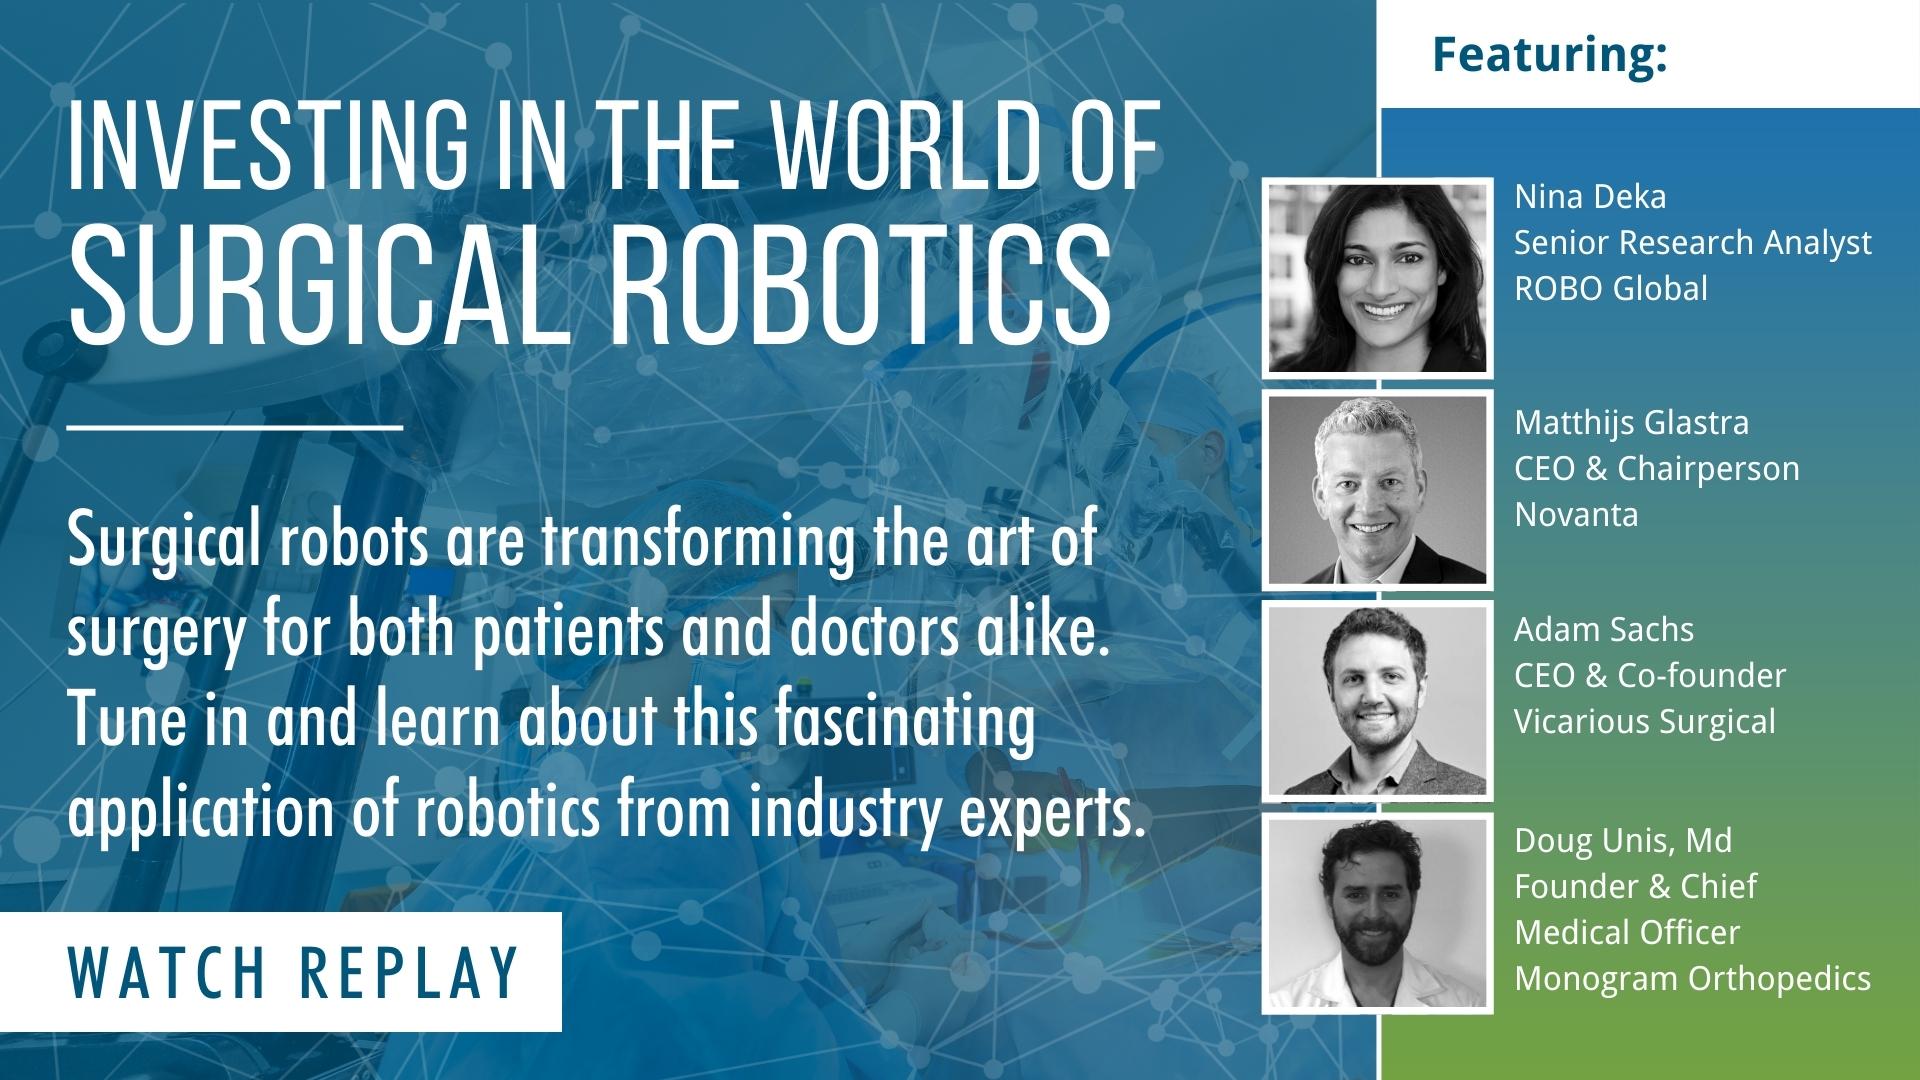 [VIDEO] Investing in the World of Surgical Robotics